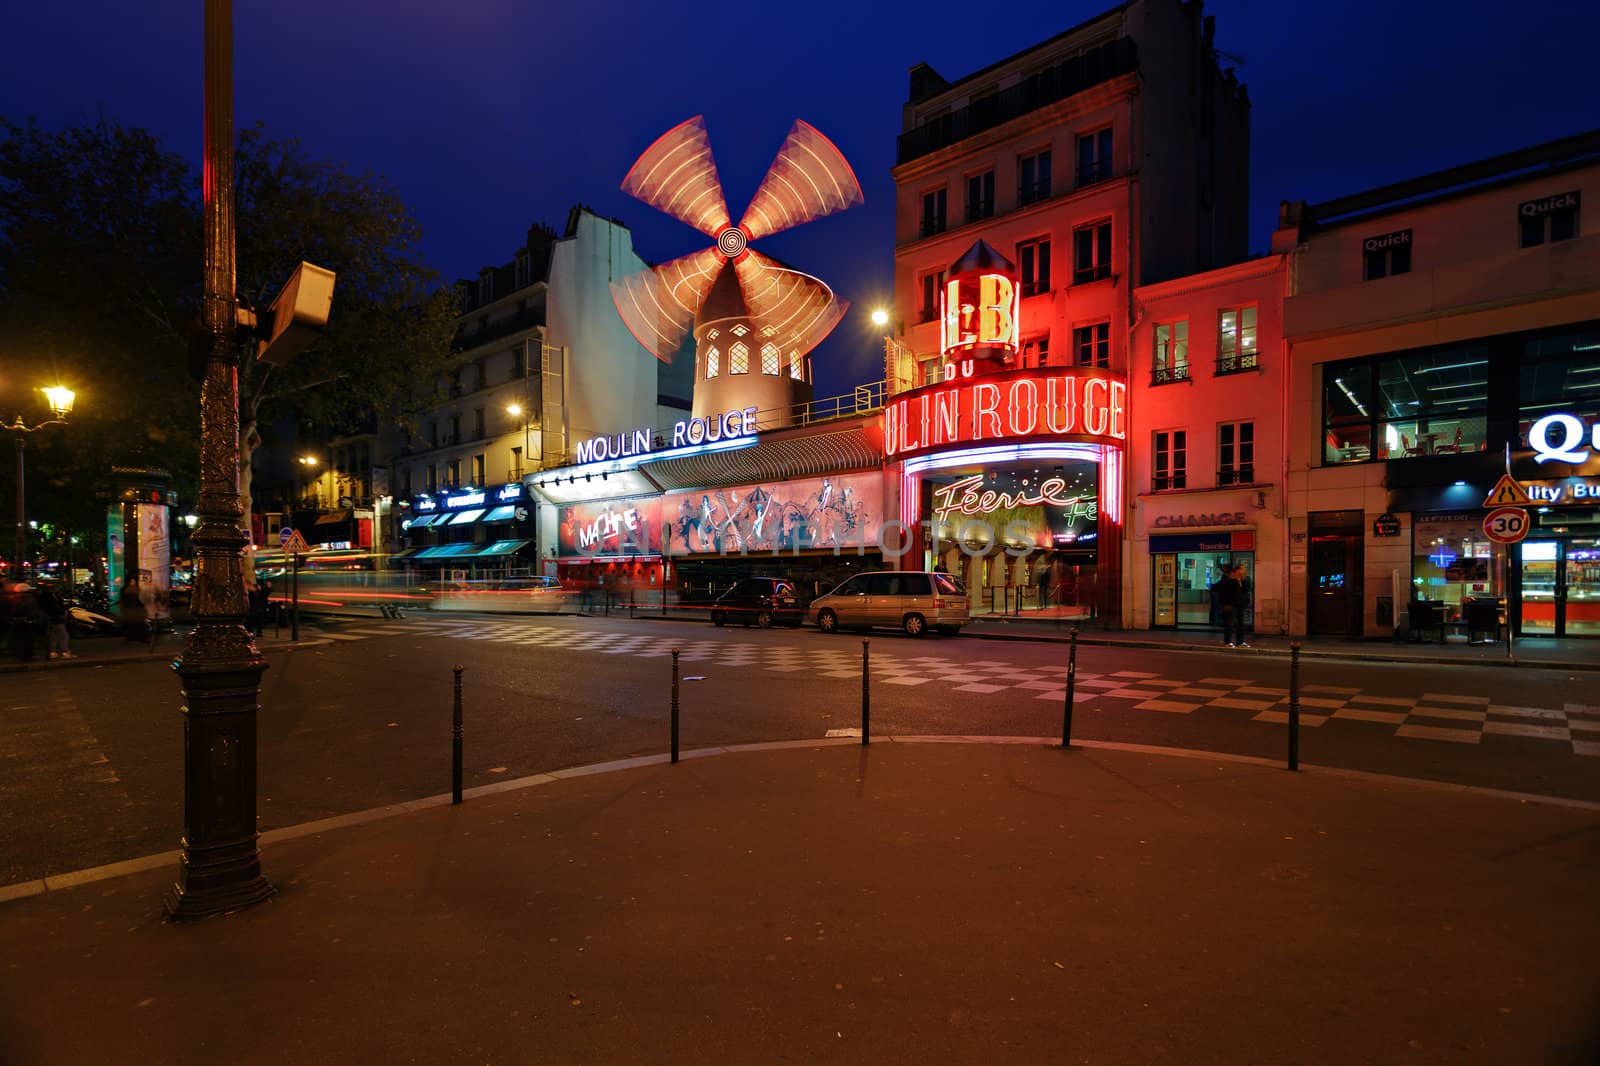 Moulin Rouge night view by Roka